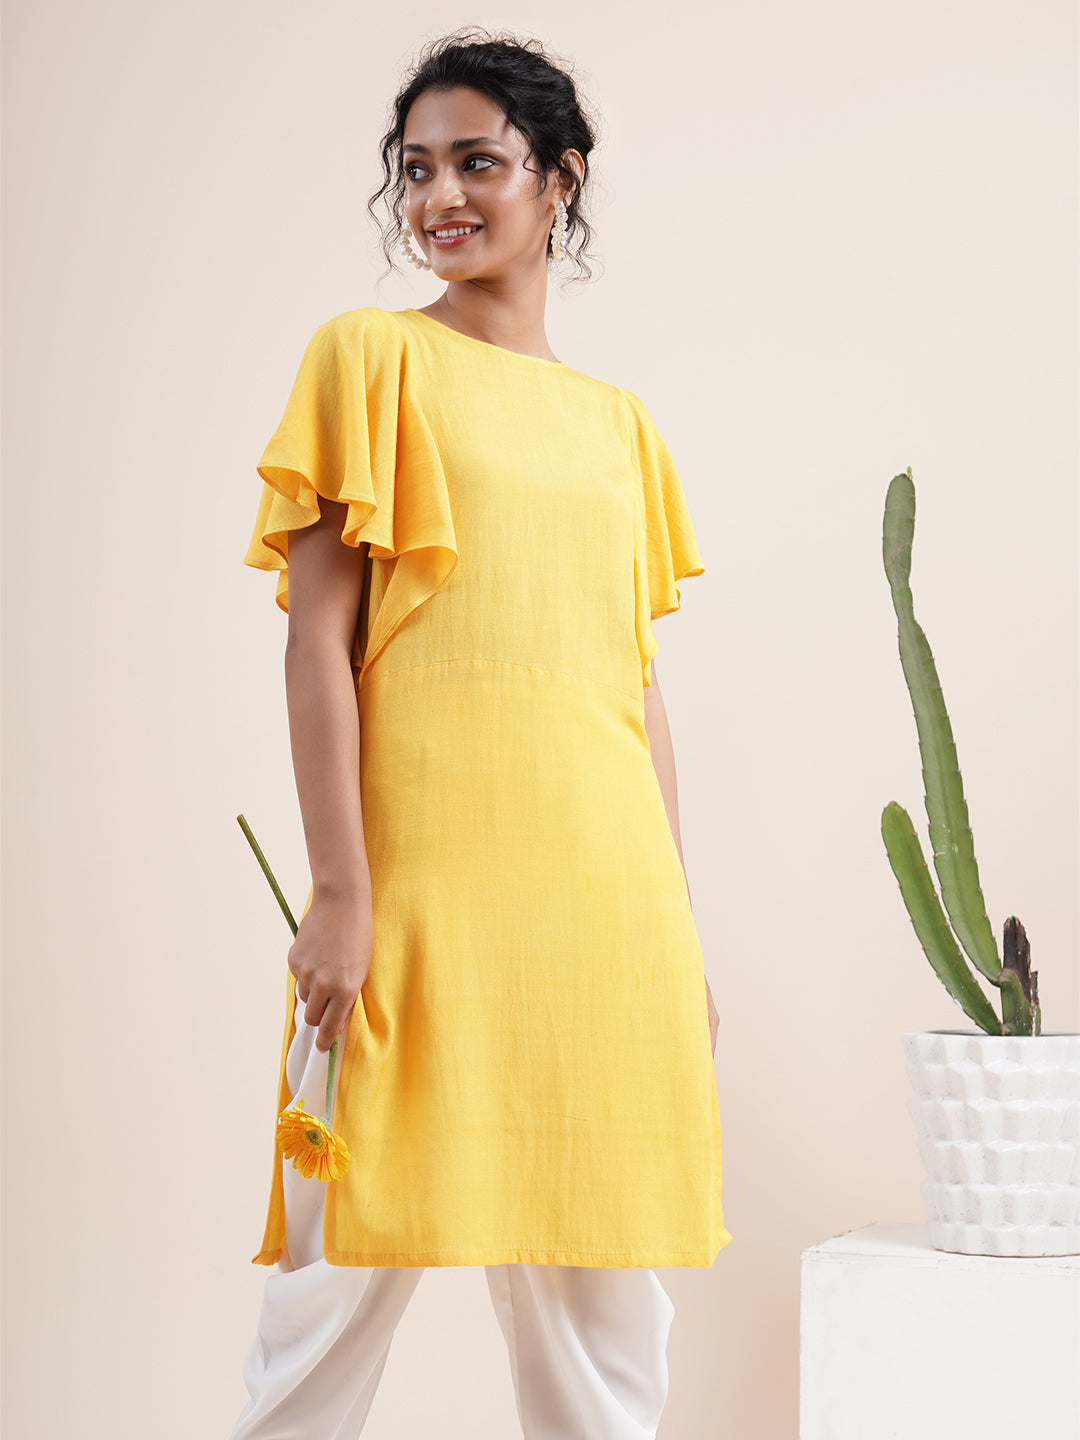 Yellow Butterfly sleeved kurta in rayon flax